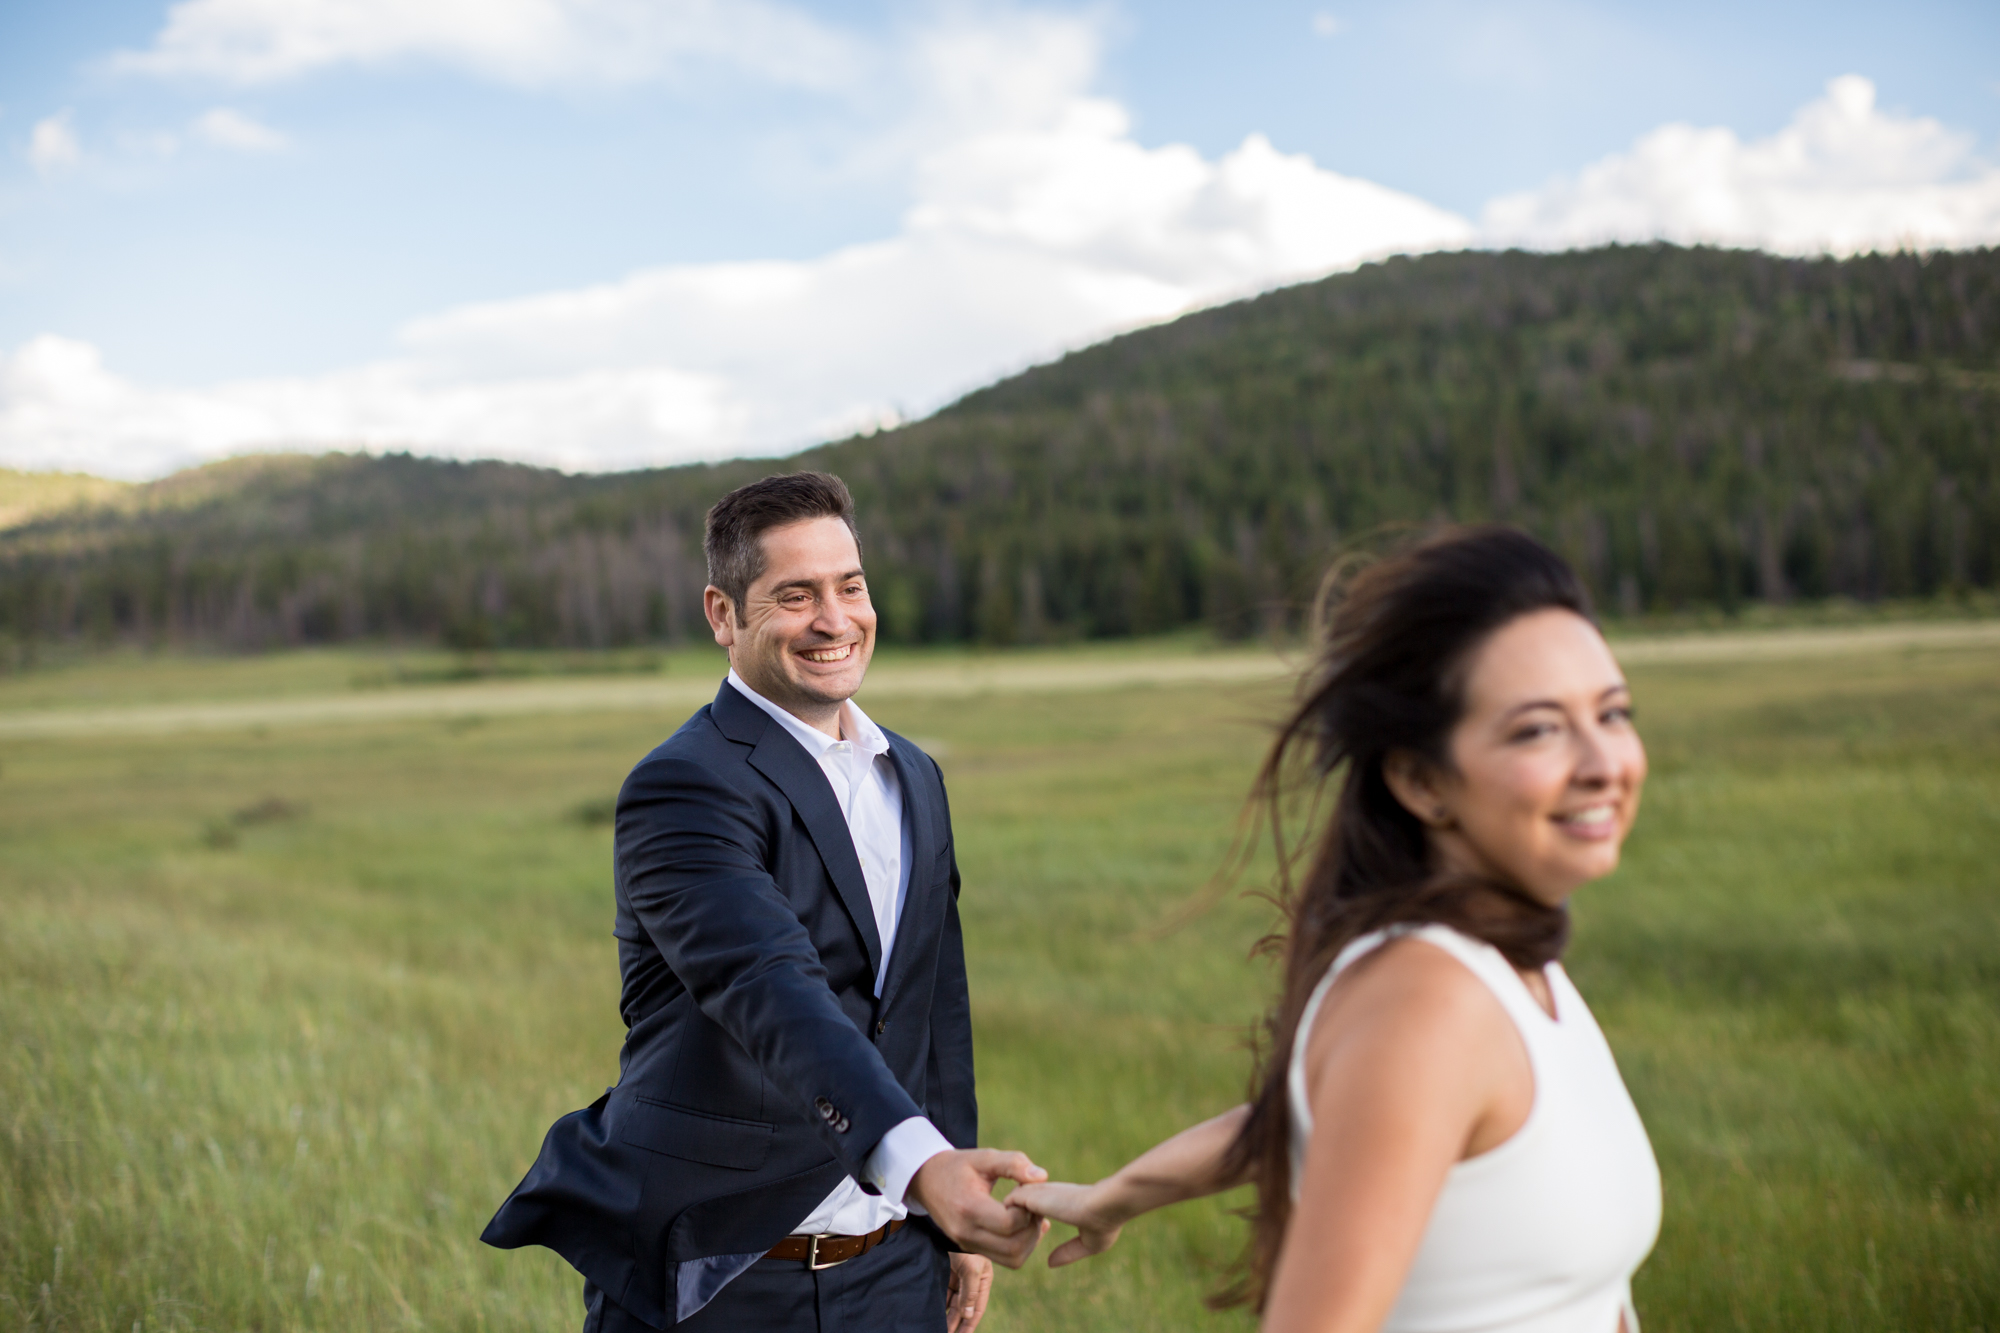 rocky mountain national park engagement session dressy outfit at sheep lakes